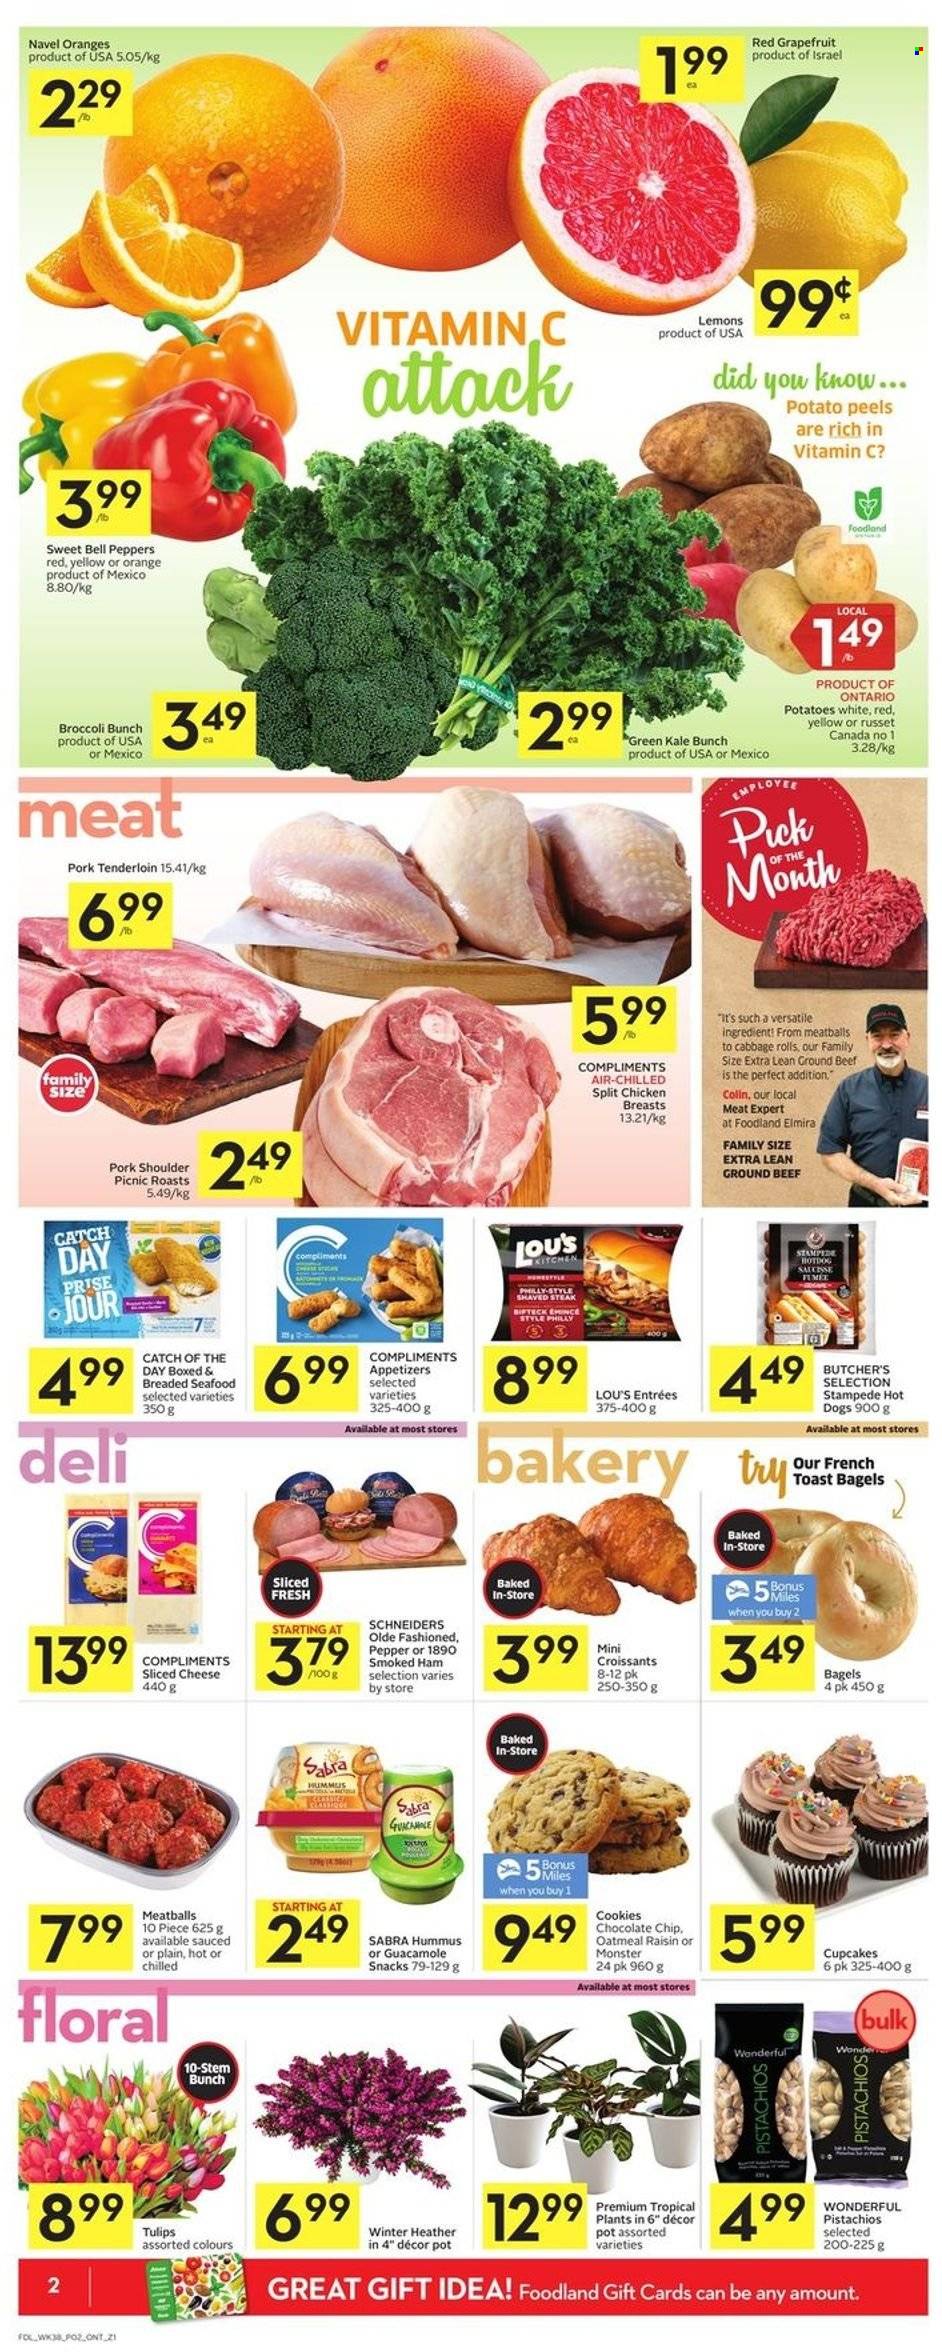 thumbnail - Foodland Flyer - January 13, 2022 - January 19, 2022 - Sales products - bagels, hot dog rolls, croissant, cupcake, bell peppers, broccoli, cabbage, russet potatoes, kale, potatoes, peppers, grapefruits, lemons, navel oranges, seafood, hot dog, meatballs, ham, smoked ham, hummus, guacamole, sliced cheese, cheese, cookies, snack, oatmeal, pistachios, Monster, beef meat, ground beef, pork meat, pork shoulder, pork tenderloin, vitamin c, steak, oranges. Page 2.